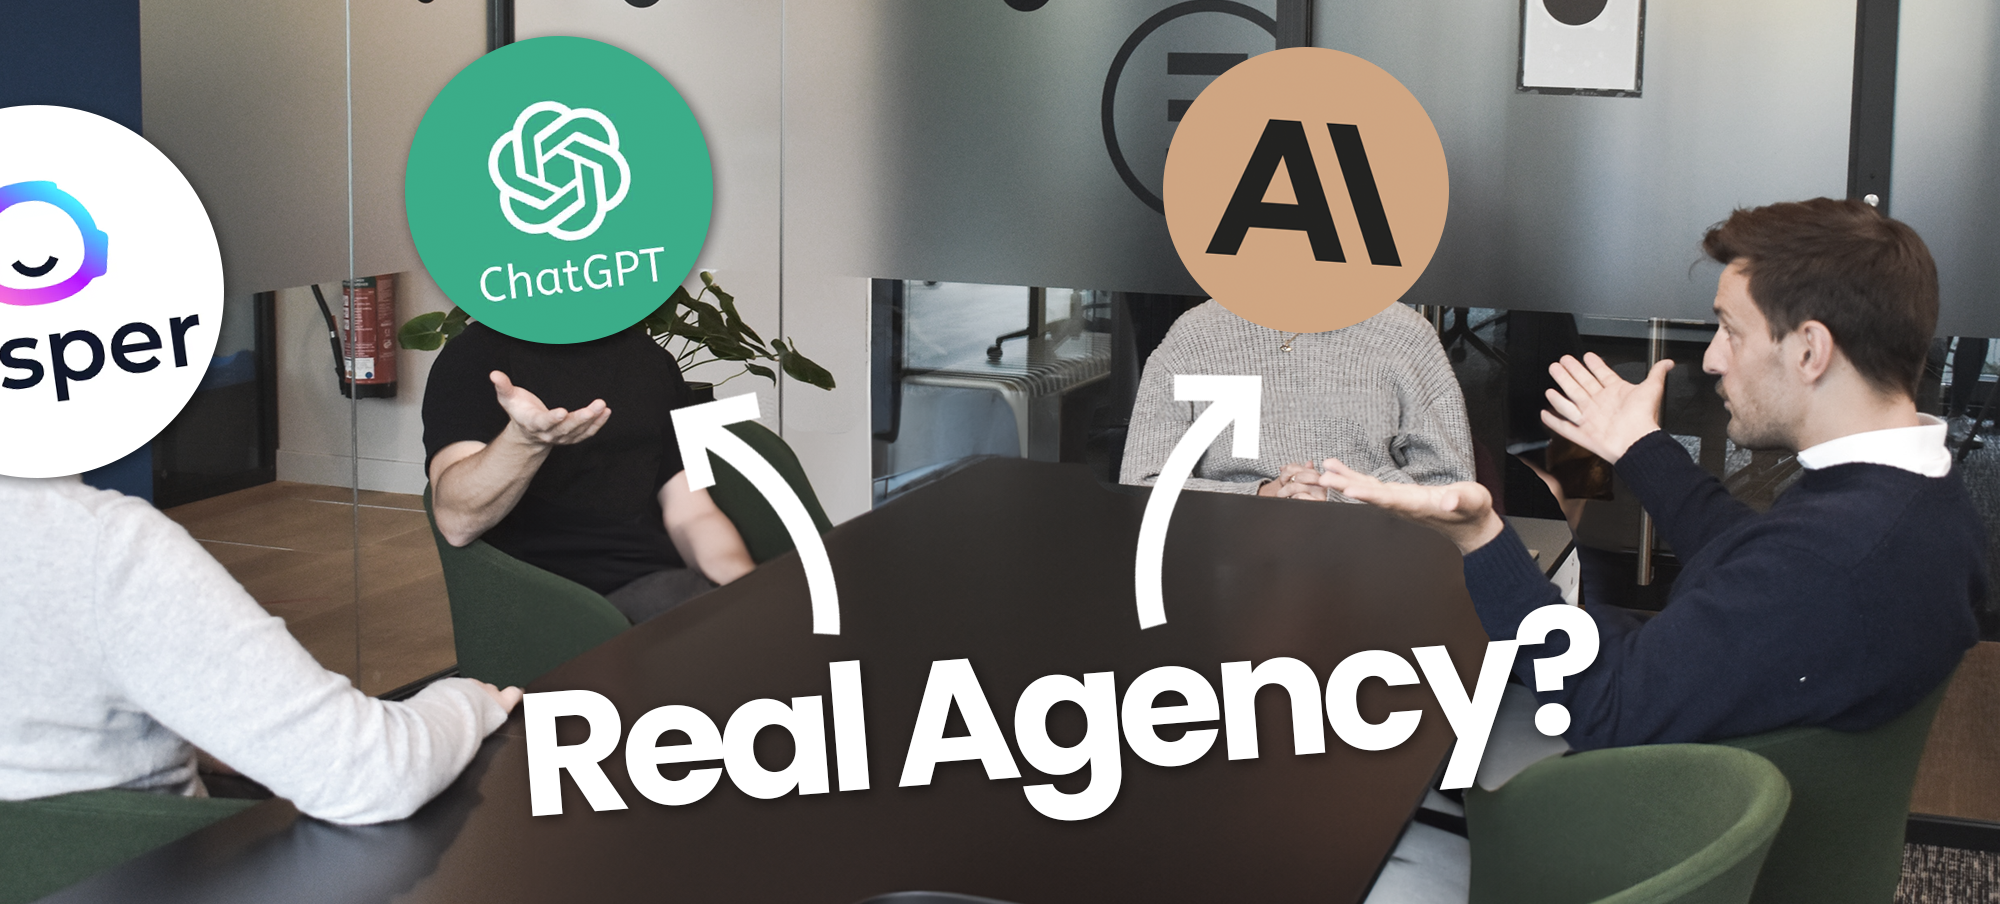 hire AI to build an agency_